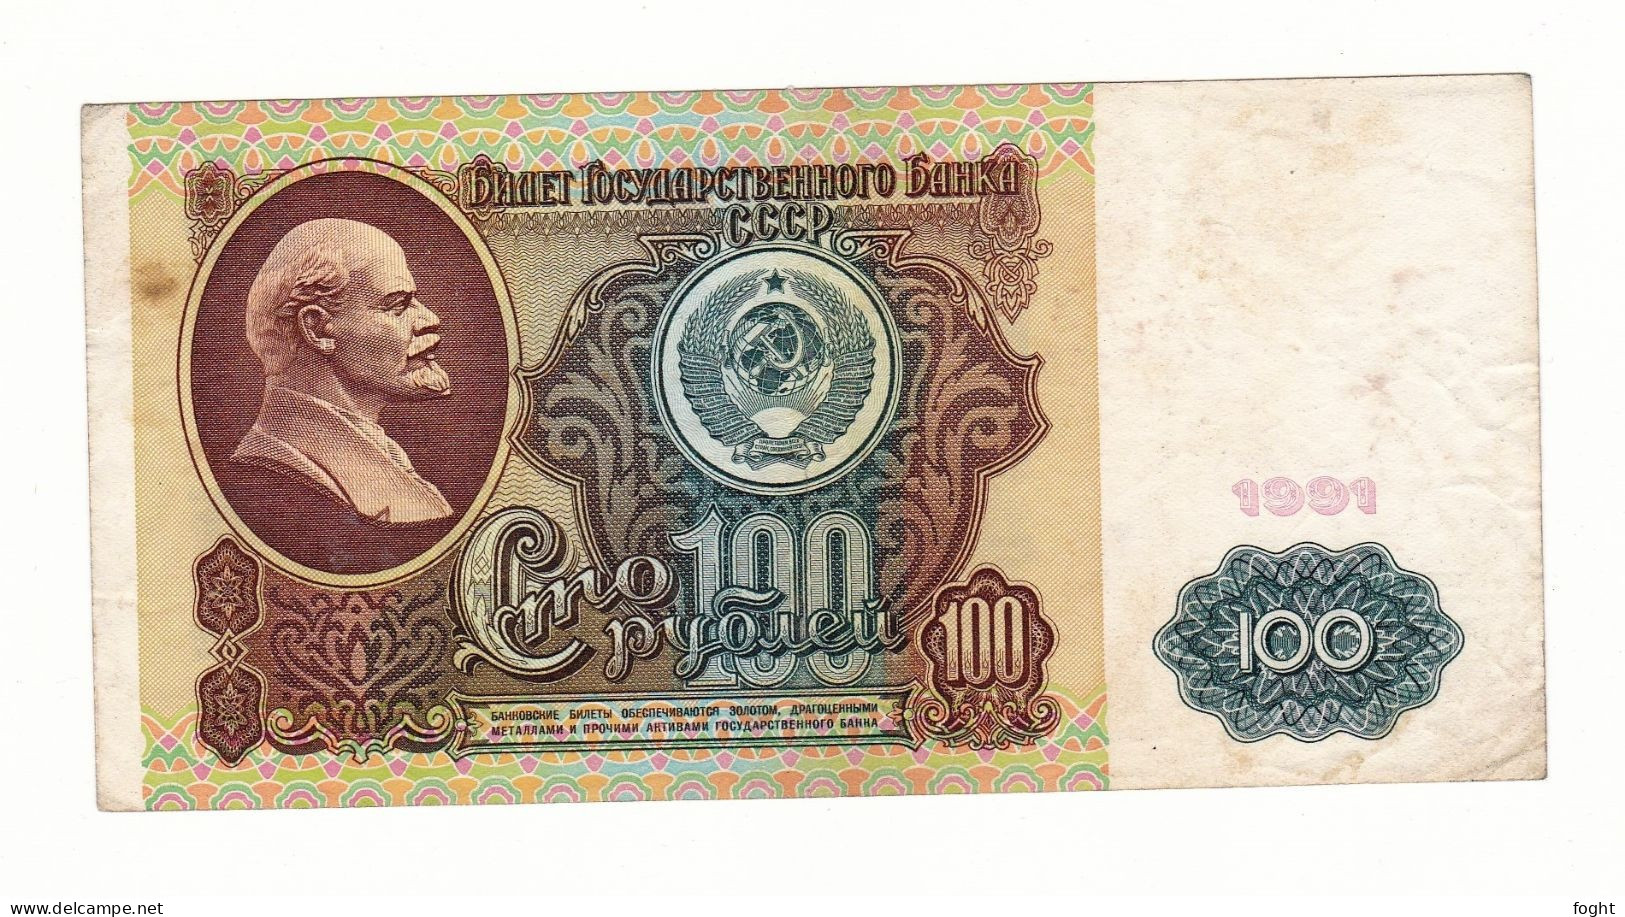 1991 Russia State Bank Note U.S.S.R. Banknote 100 Rubles,P#242A - Rusland